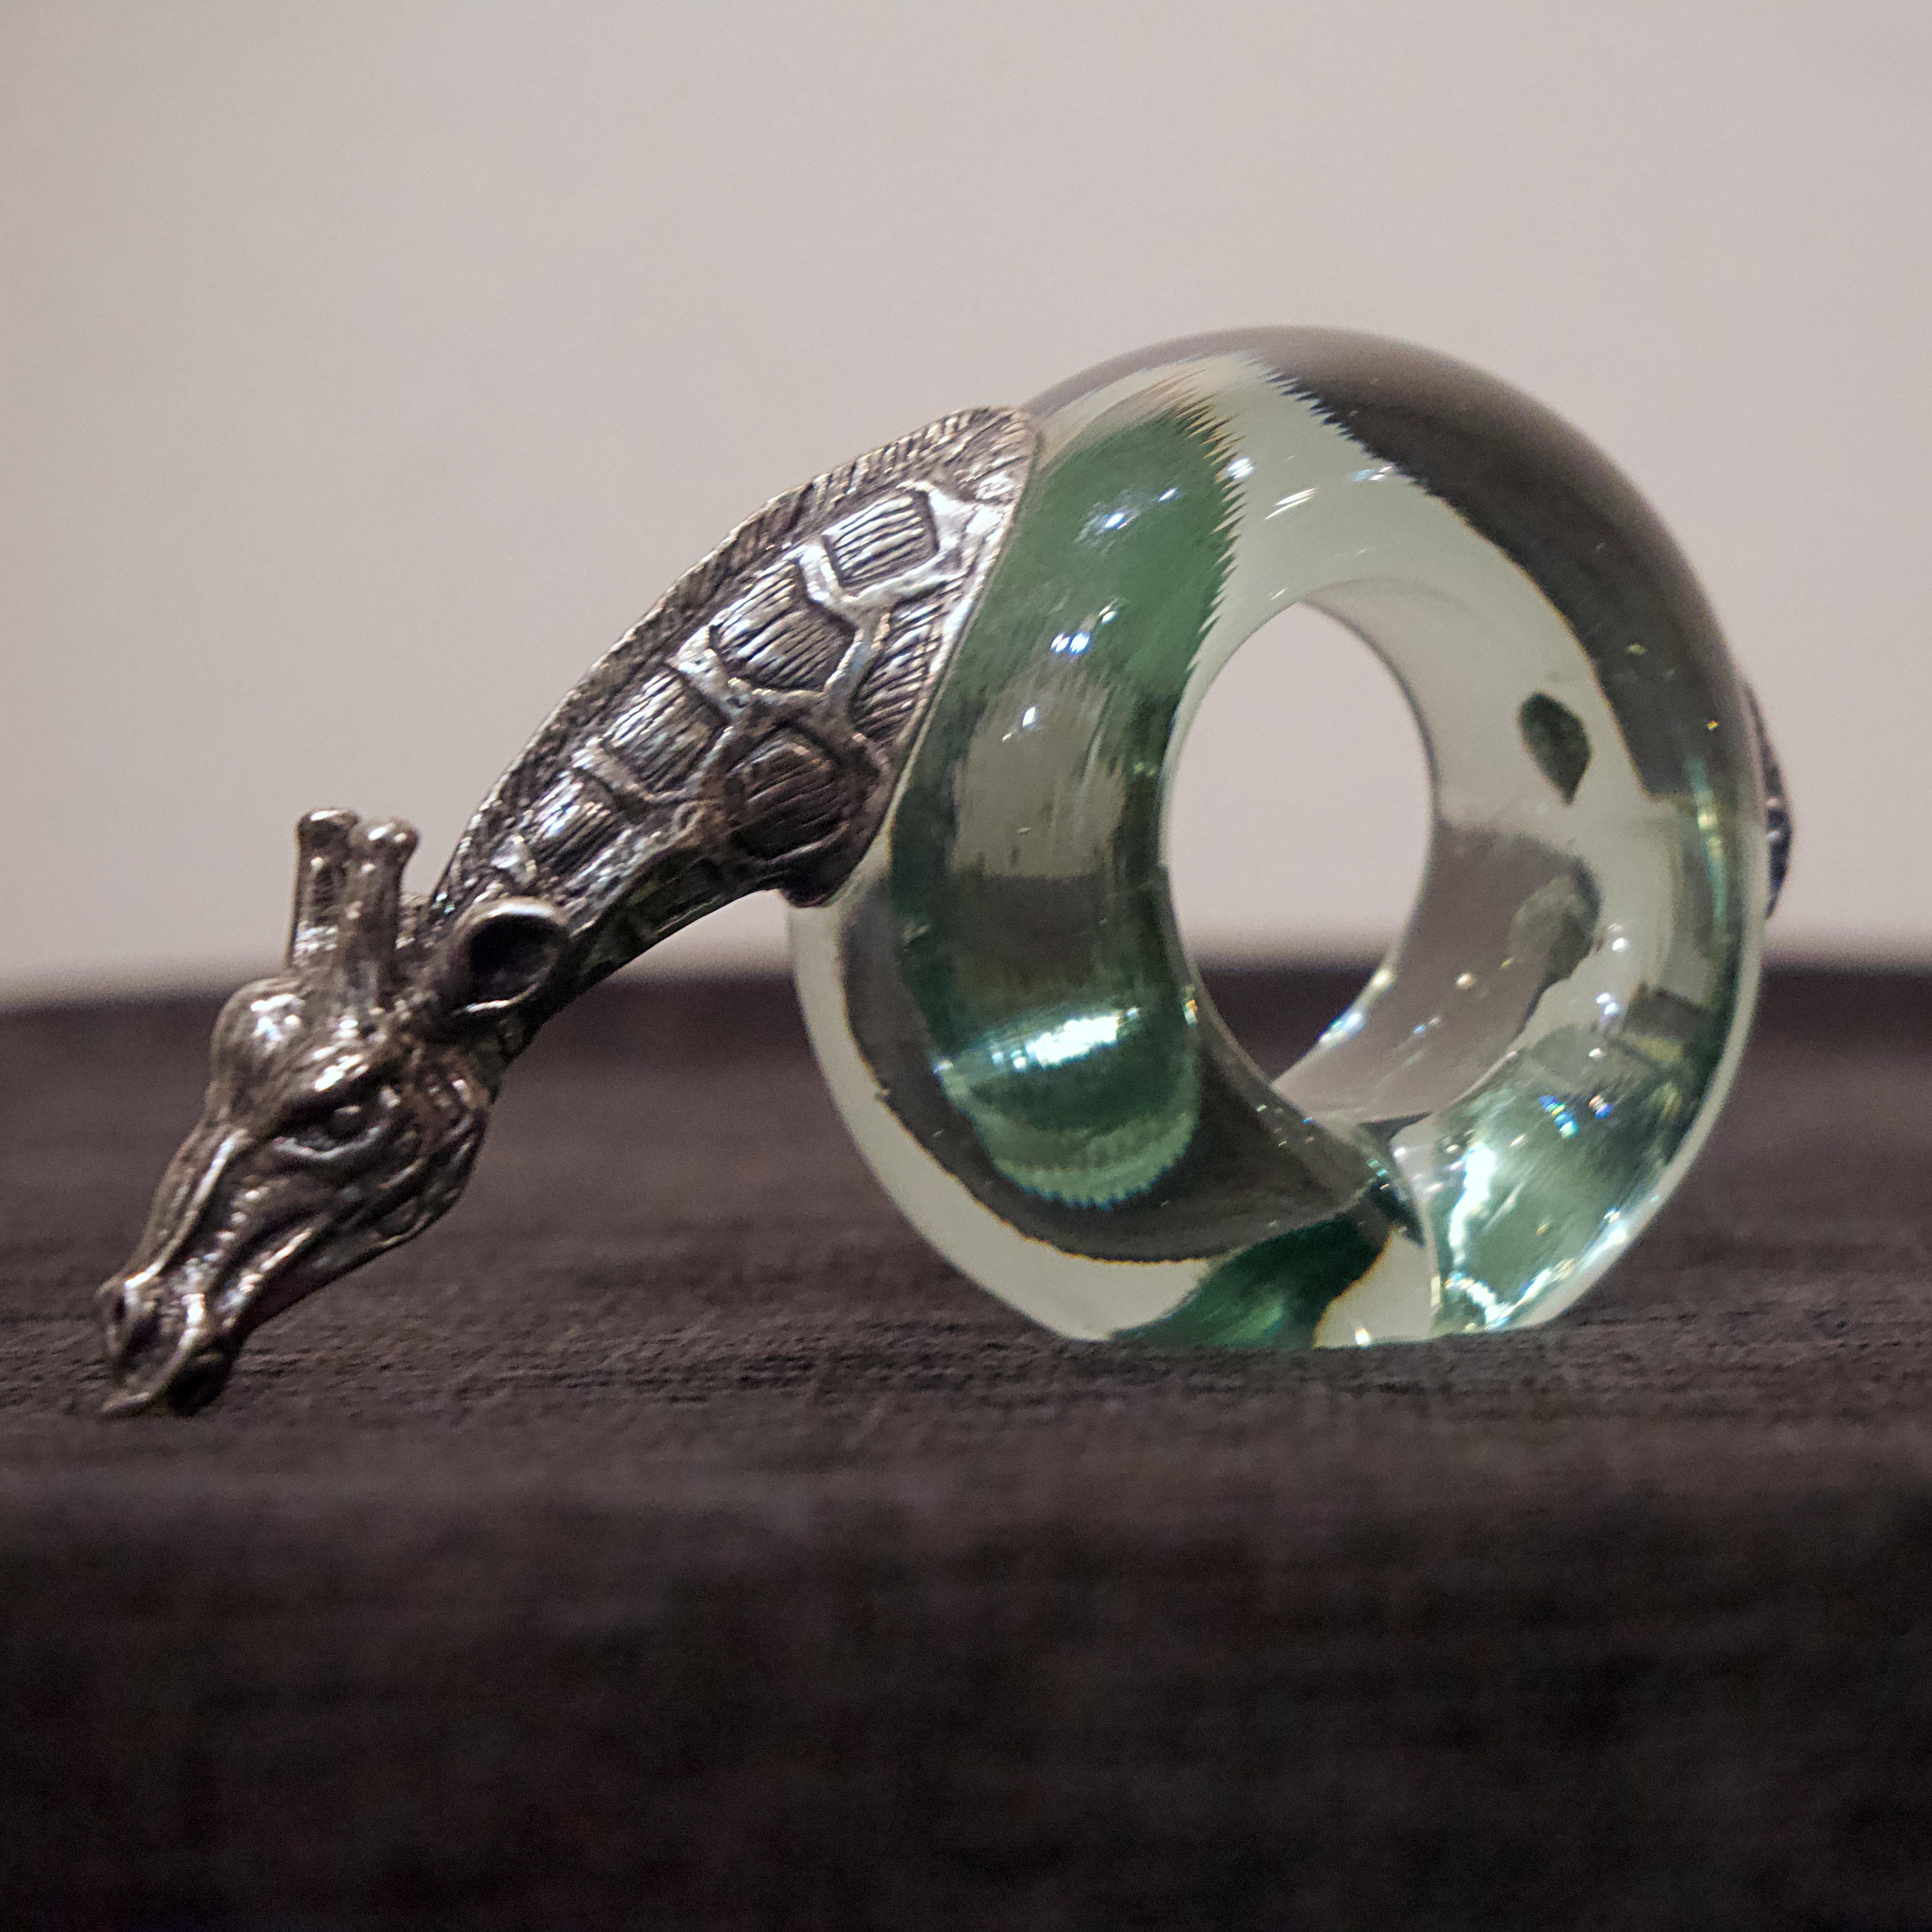 Set of 8 Pewter and Glass Animal Napkin Rings 1